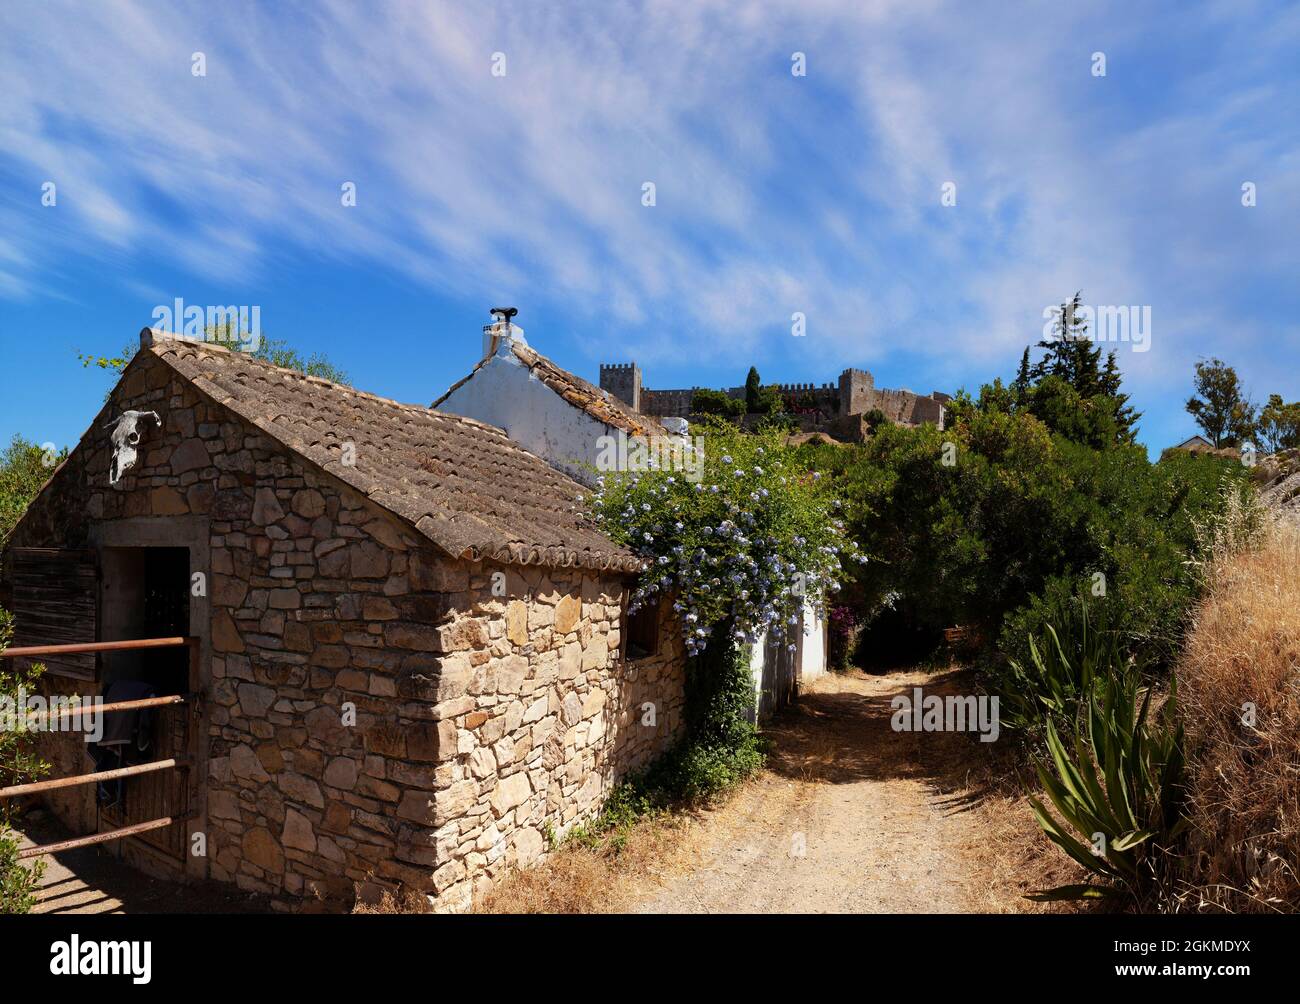 The walled hilltop village of Castellar de la Frontera in Cadiz Province, Andalucia, Spain is located in a preserved Moorish-Christian fortress. Stock Photo